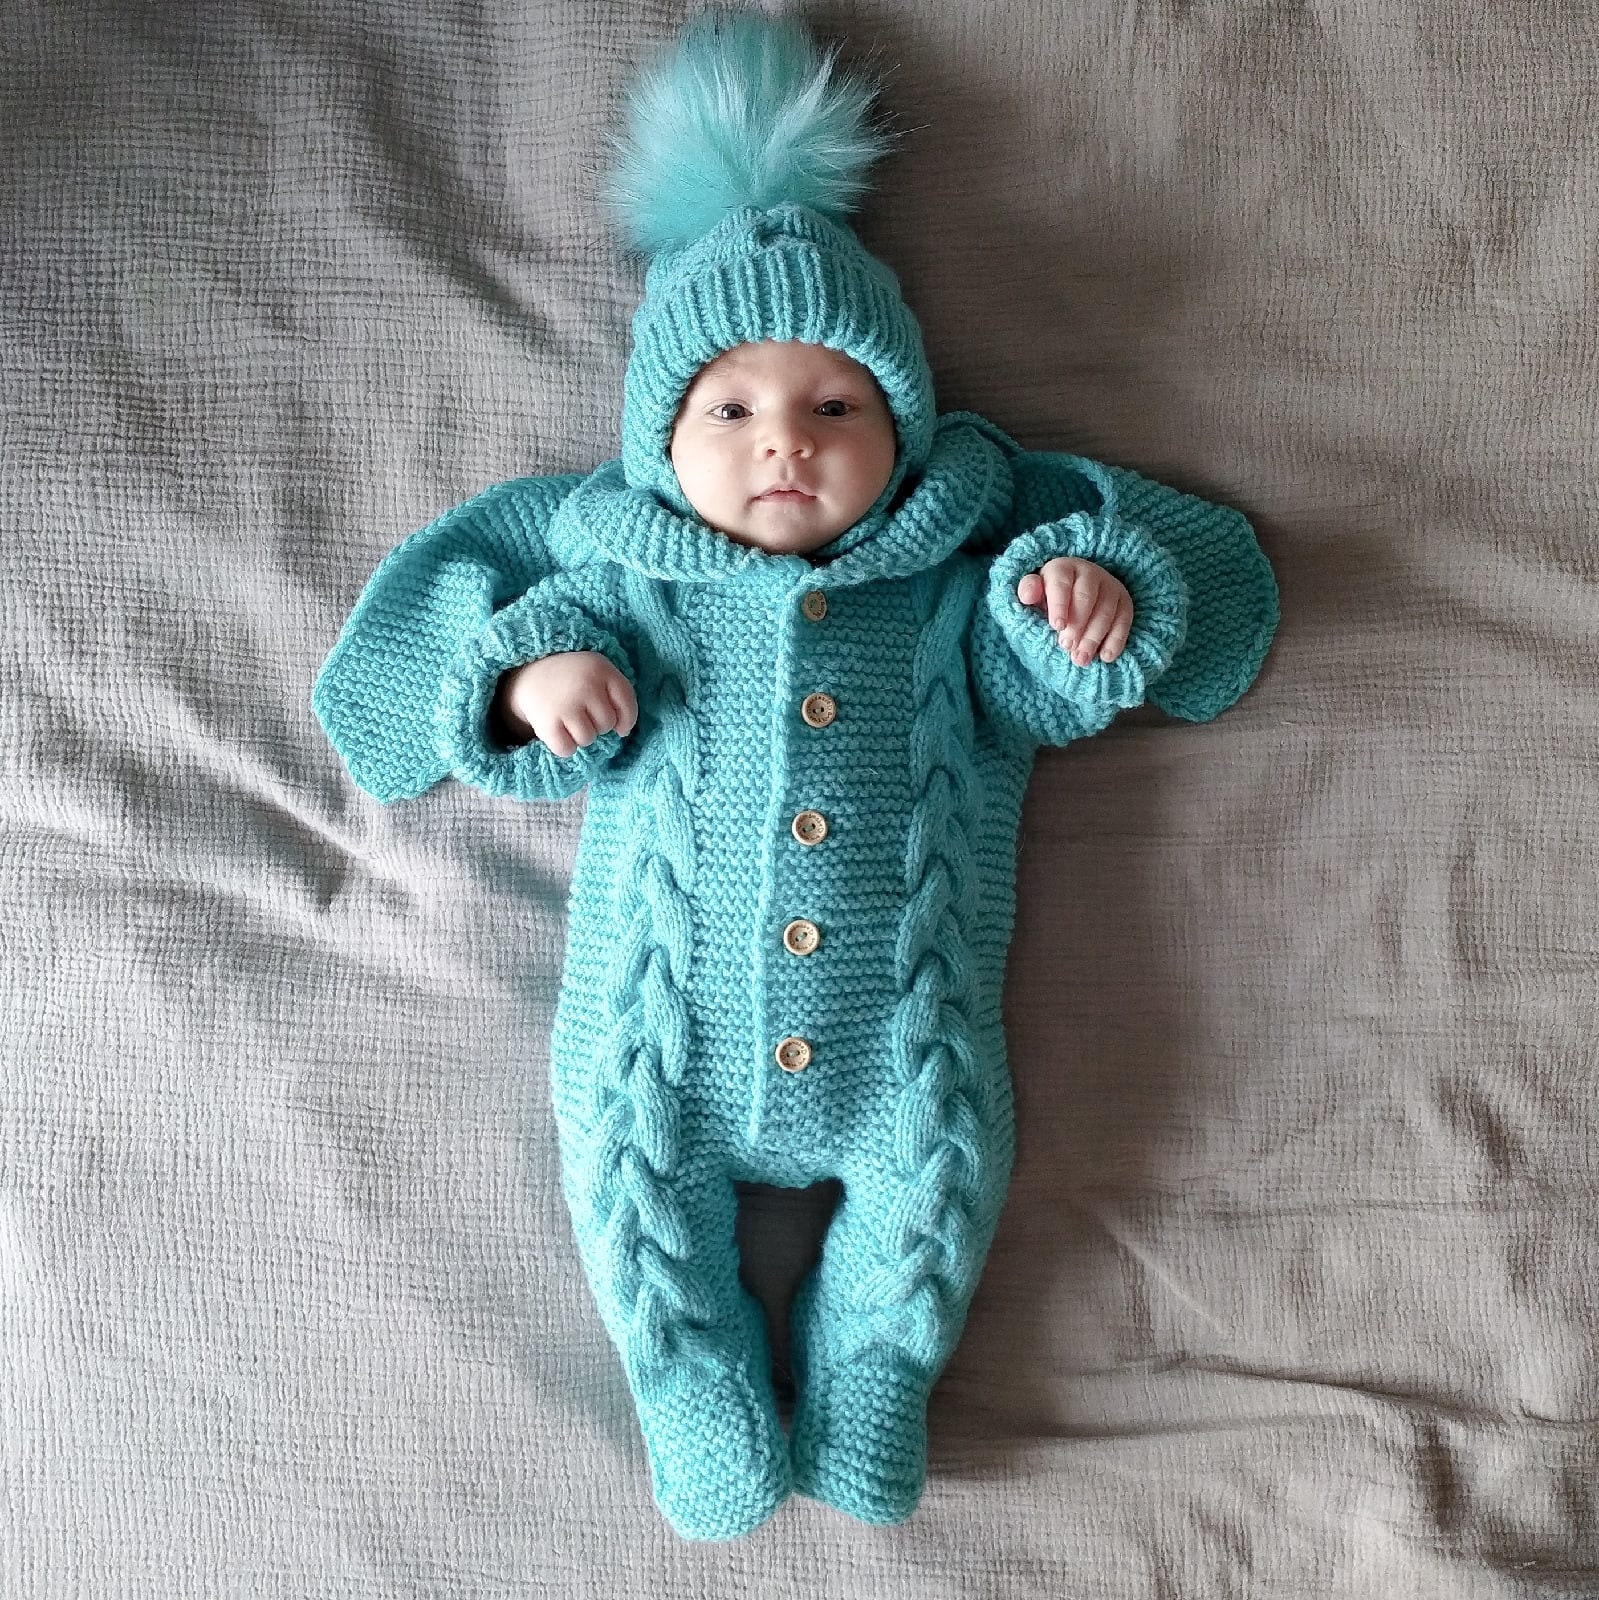 Knitting pattern for baby jumpsuit 0-3 3-6 months baby | Etsy